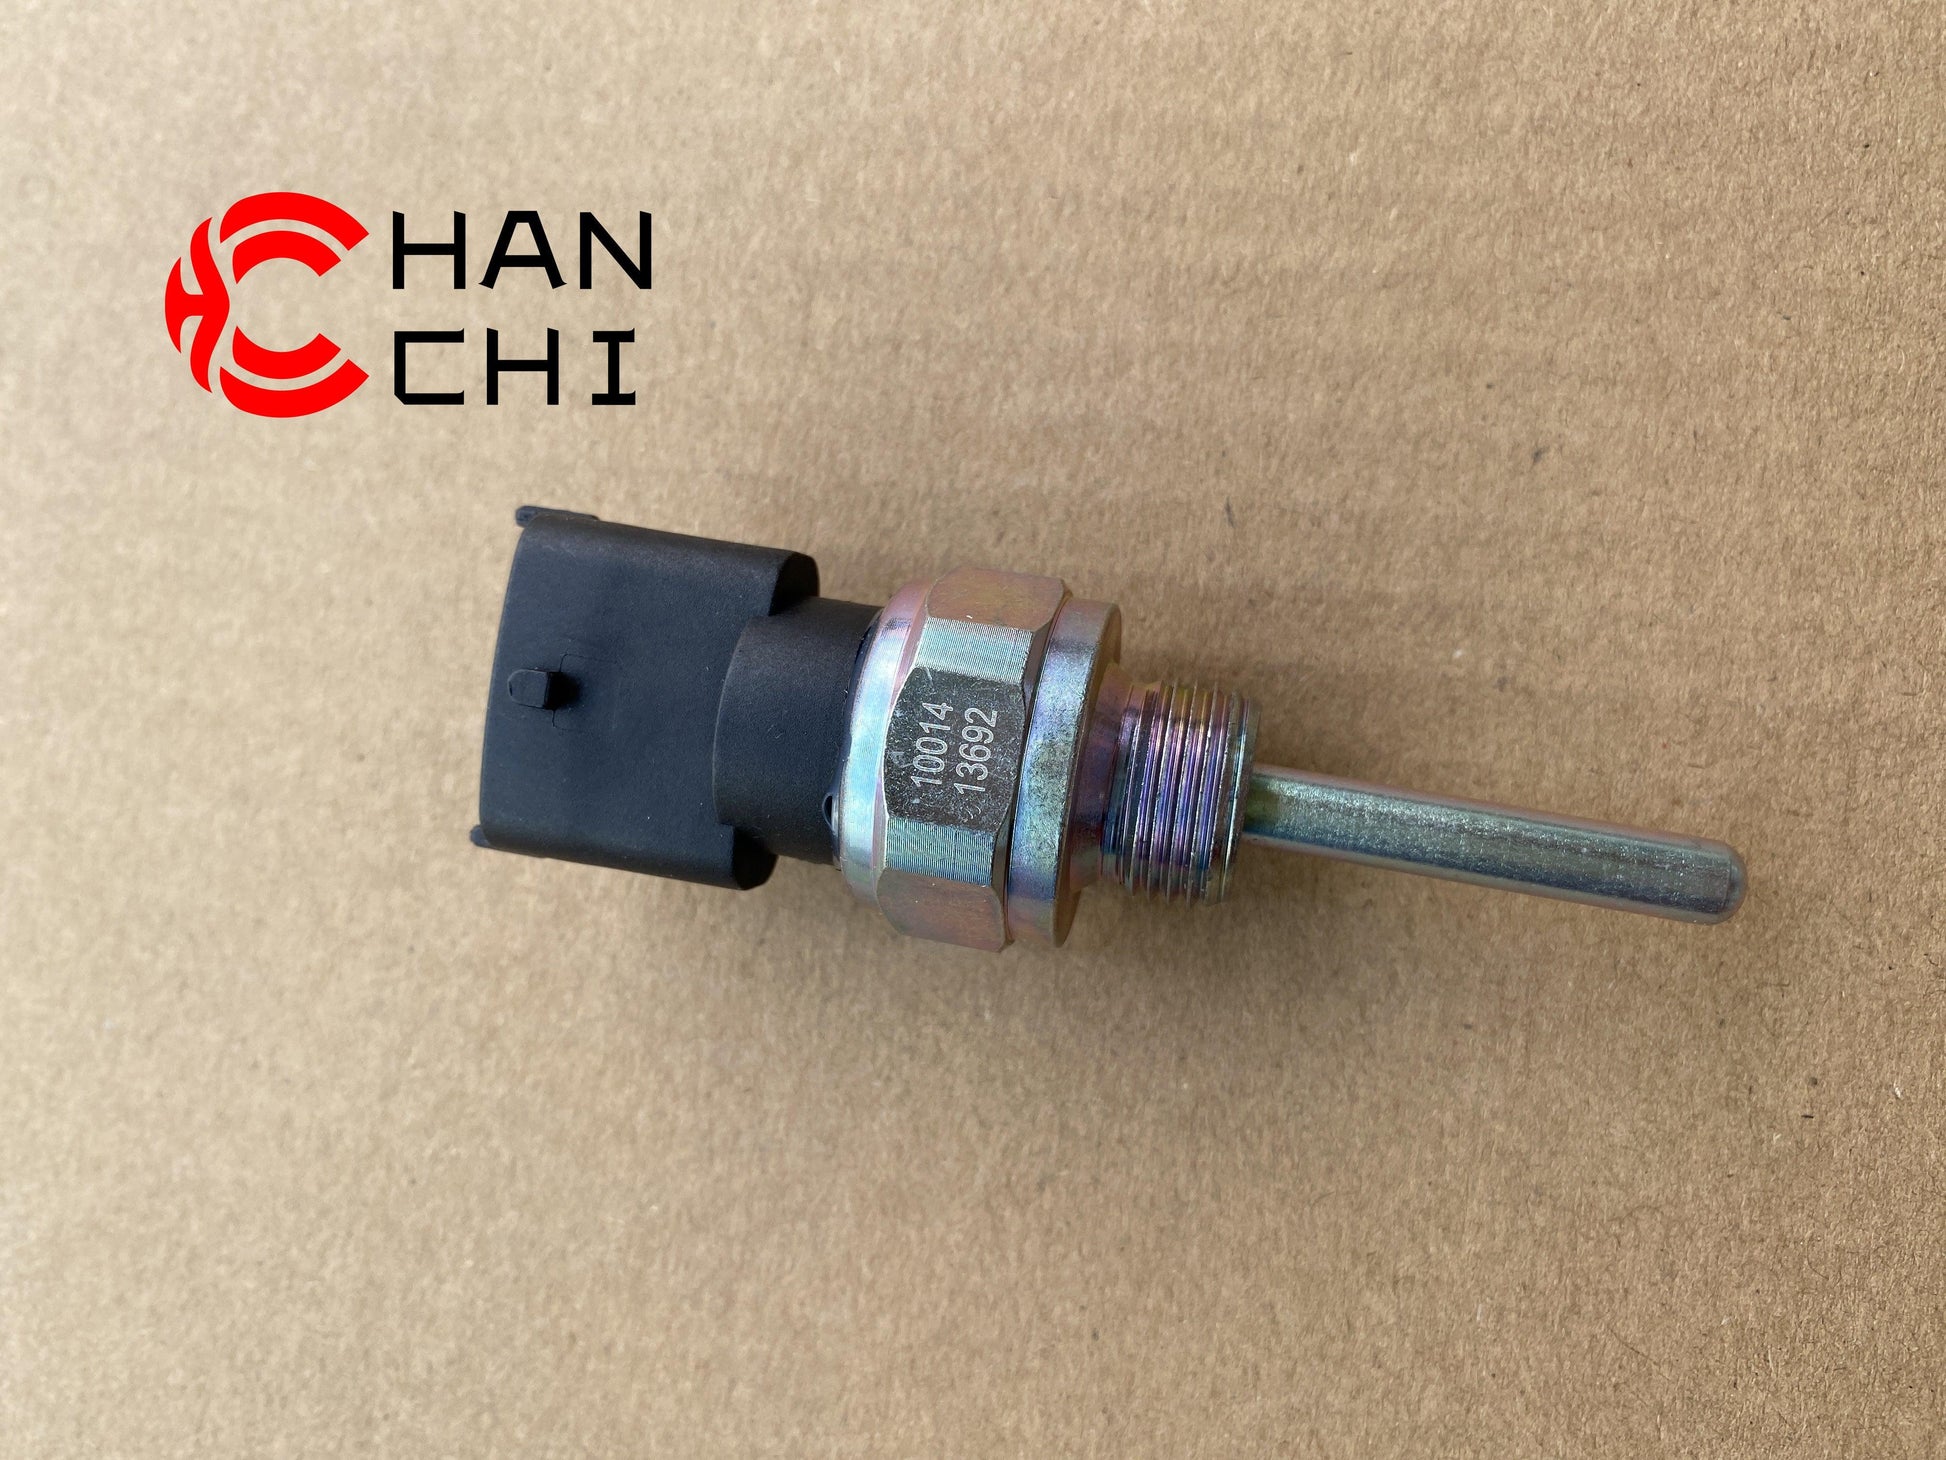 【Description】---☀Welcome to HANCHI☀---✔Good Quality✔Generally Applicability✔Competitive PriceEnjoy your shopping time↖（^ω^）↗【Features】Brand-New with High Quality for the Aftermarket.Totally mathced your need.**Stable Quality**High Precision**Easy Installation**【Specification】OEM：100141369Material：metalColor：goldenOrigin：Made in ChinaWeight：200g【Packing List】1* Oil Pressure Sensor SENSOR 【More Service】 We can provide OEM service We can Be your one-step solution for Auto Parts We can provide techn